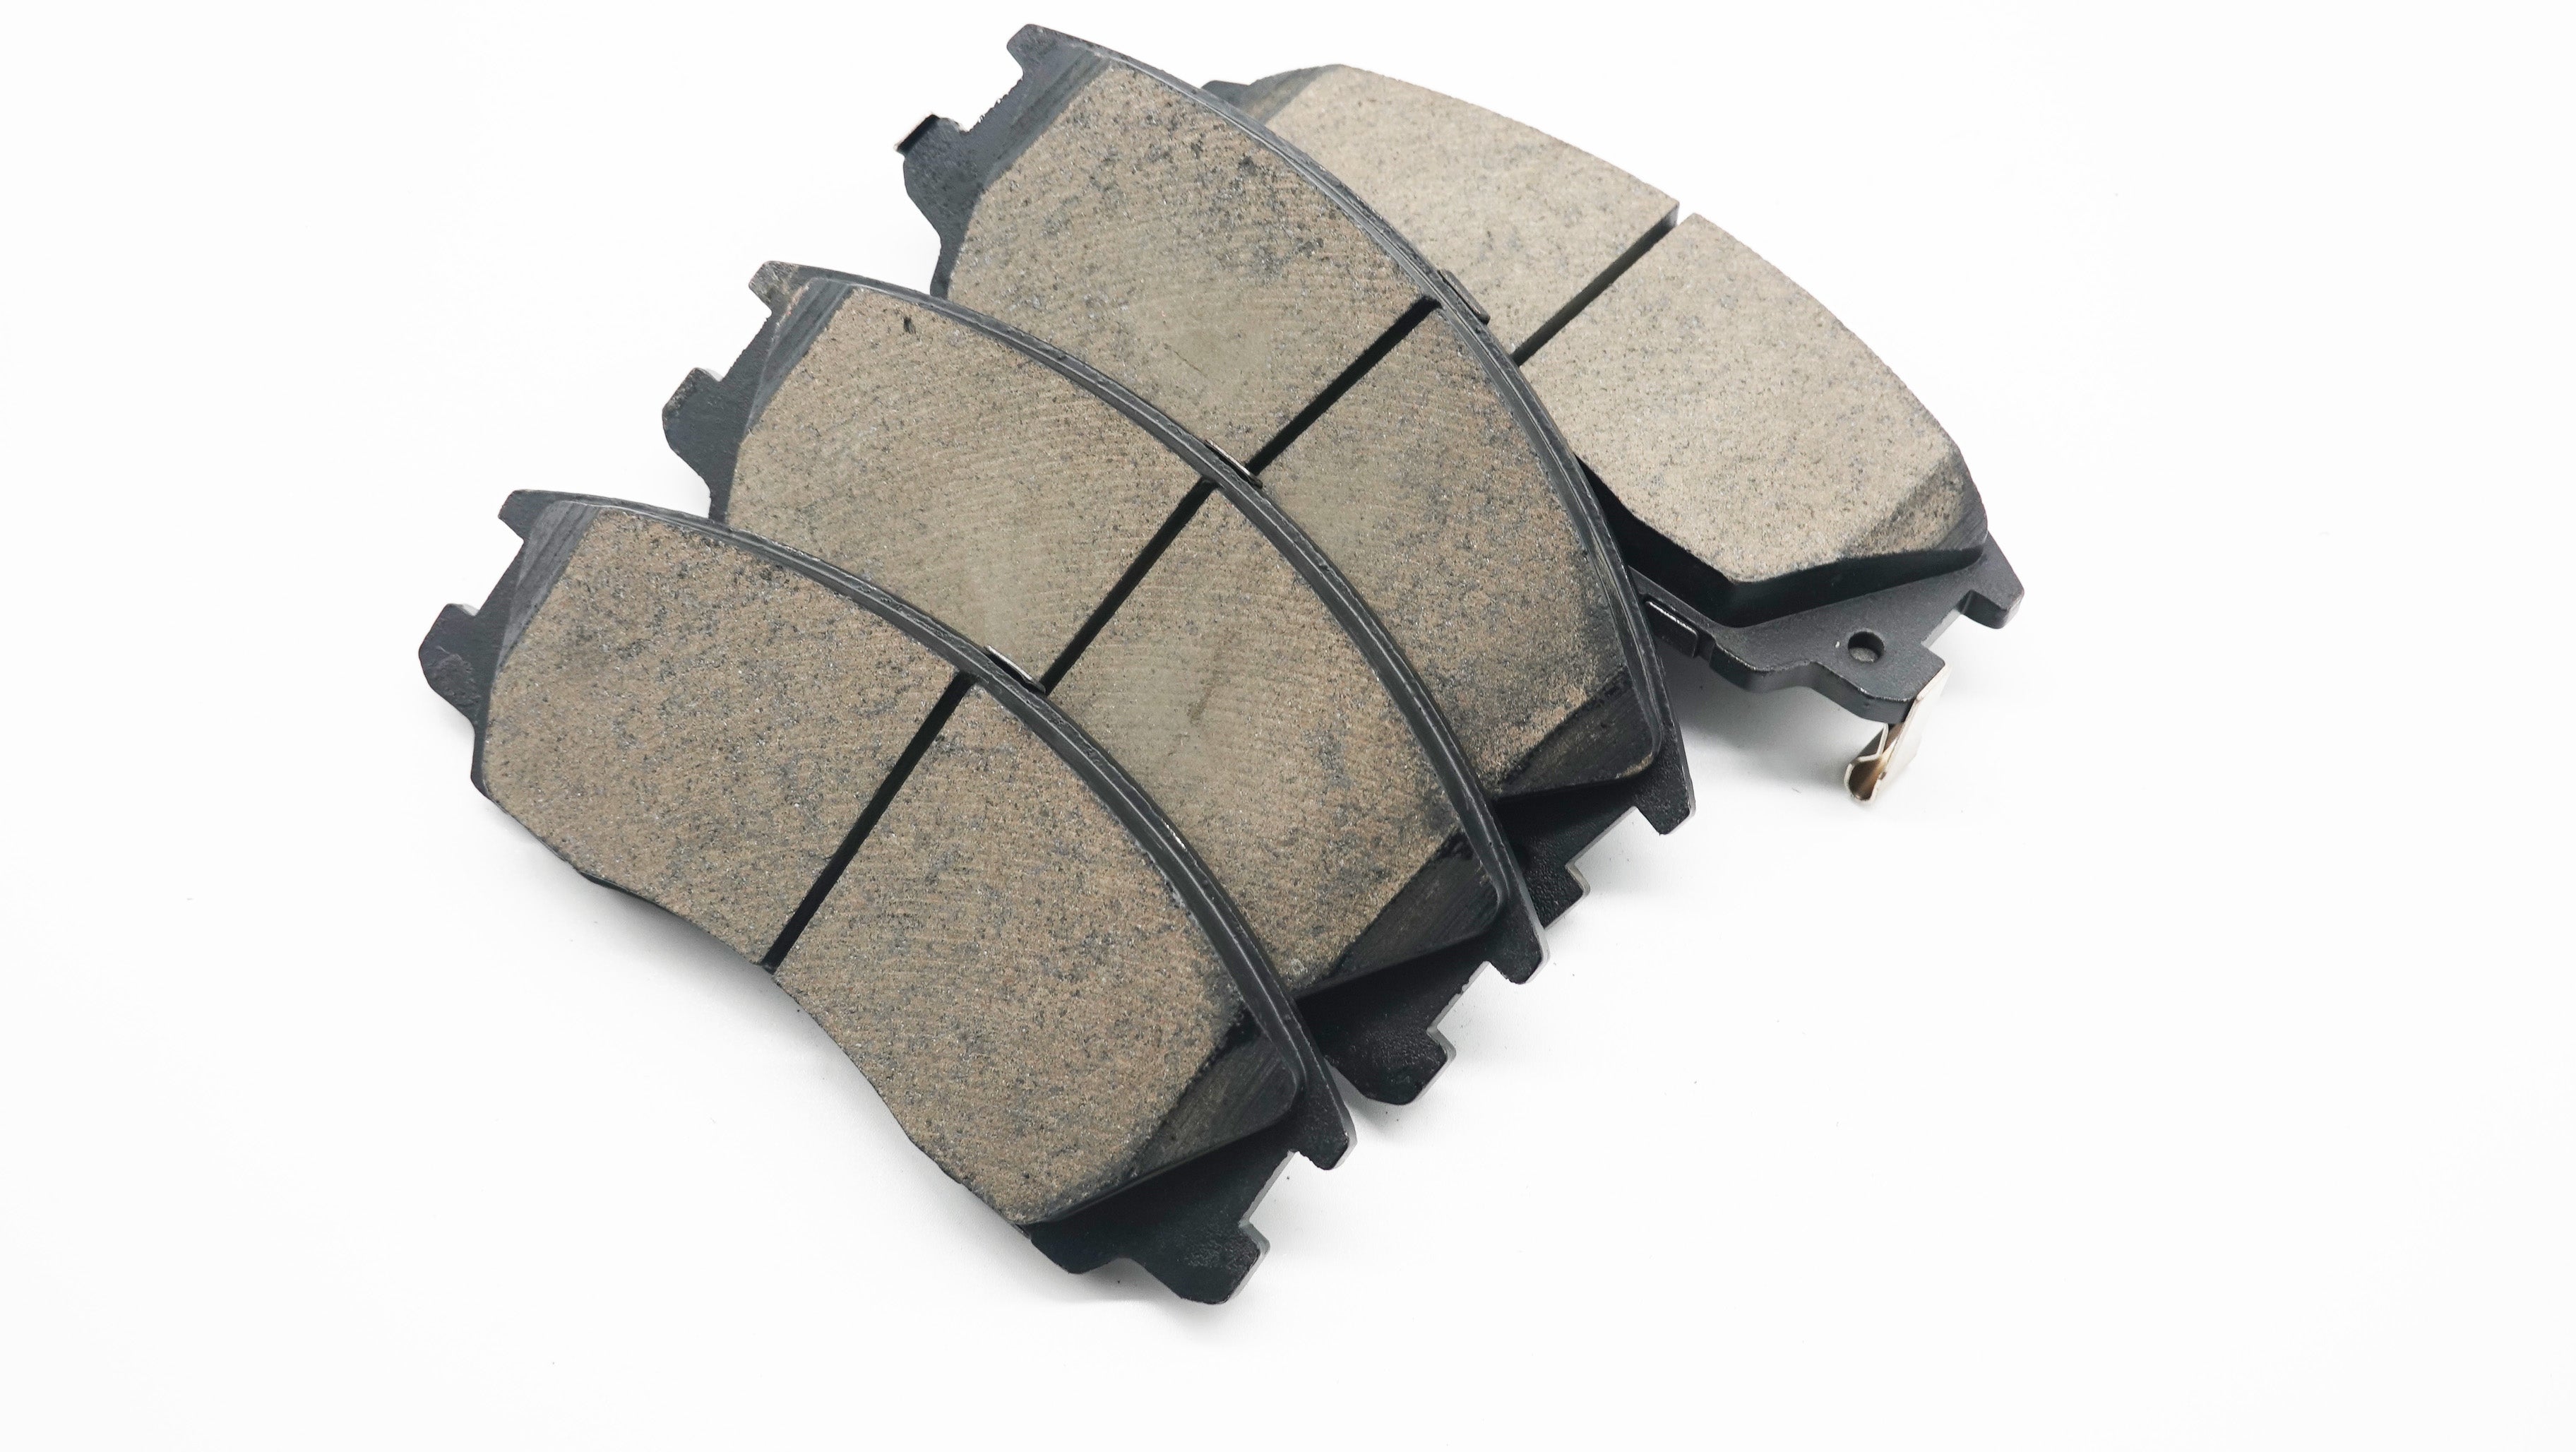 S&T Front brake pad Hot Deals in African High Quality Front brake pad for 2003-2021 Hyundai cars